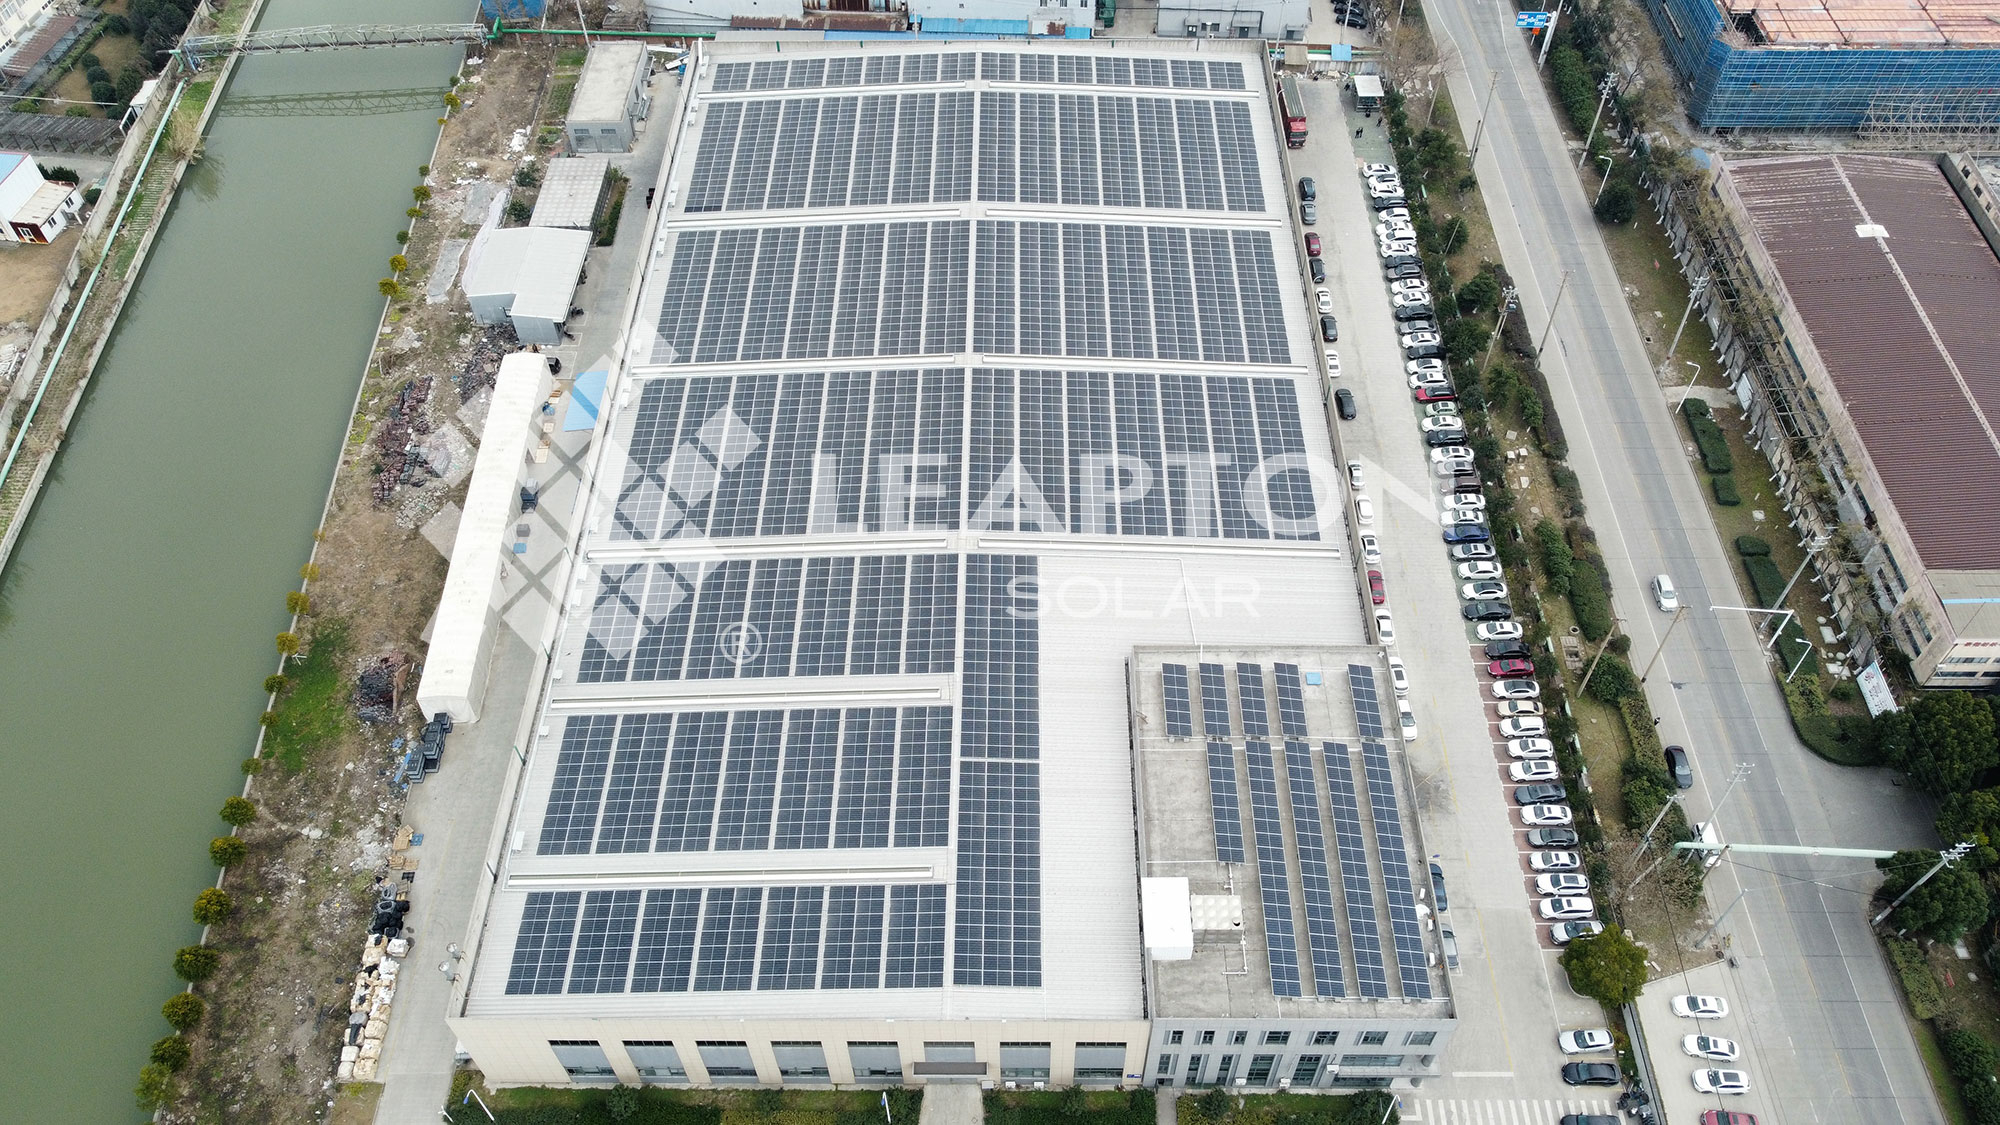 a new distributed solar project of Leapton Energy has completed